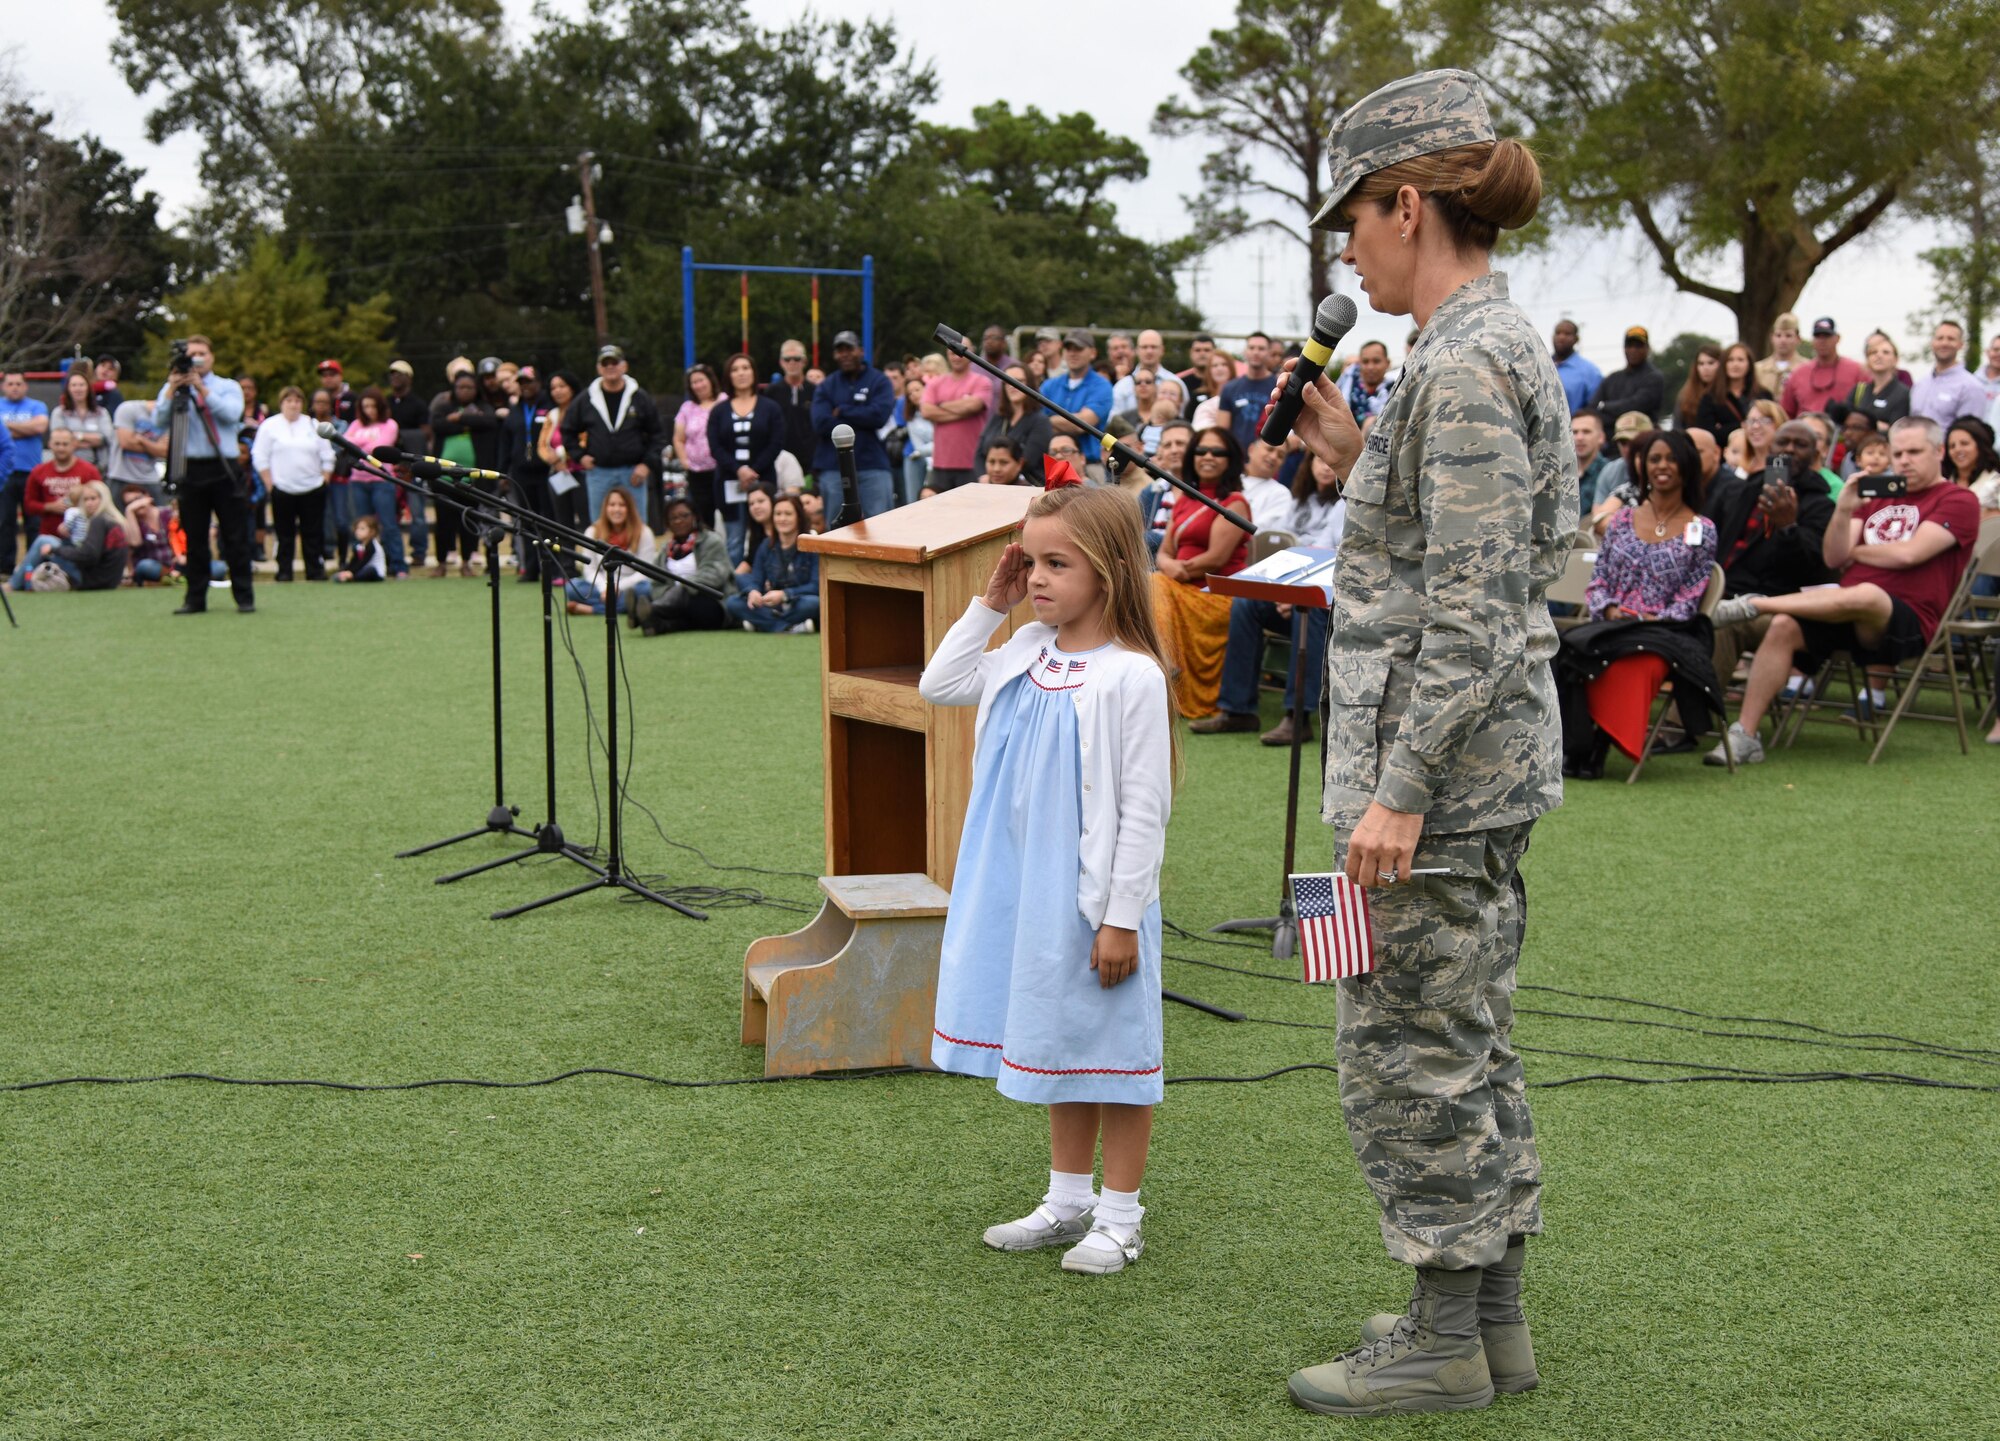 Col. Michele Edmondson, 81st Training Wing commander, introduces her daughter, Jacqueline McGowan, as she demonstrates how to render a salute during a Jeff Davis Elementary School Veterans Day Celebration Nov. 11, 2016, in Biloxi, Miss. During the event, students delivered the Pledge of Allegiance and sang several patriotic songs. The Keesler Honor Guard and other service members also participated in the event. (U.S. Air Force photo by Kemberly Groue/Released)